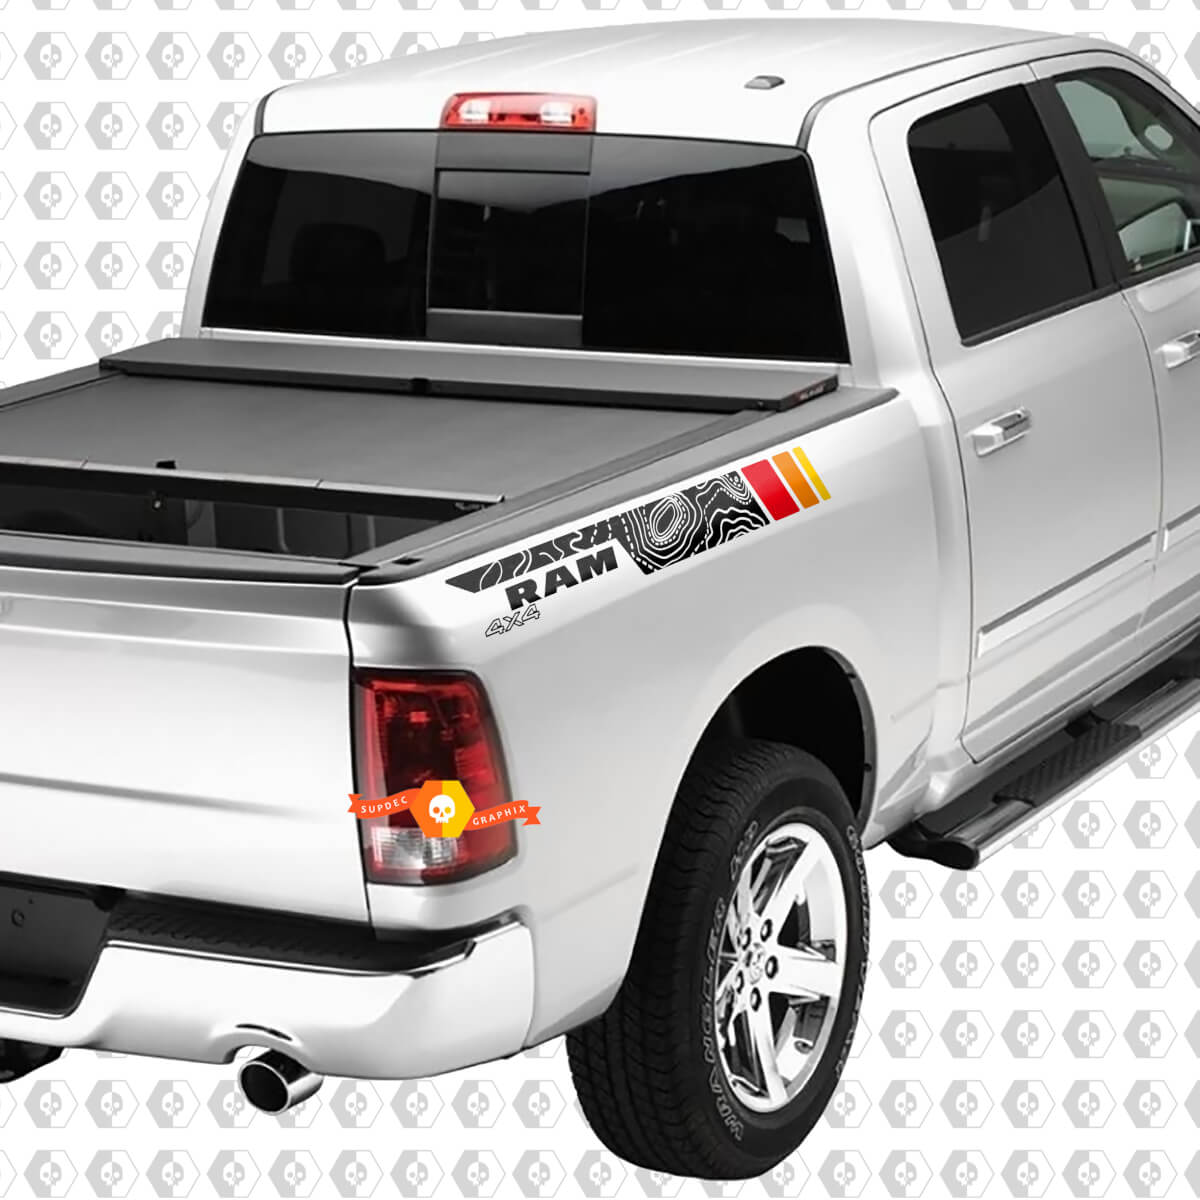 Topographic Side Truck Stripes For Dodge Ram 4x4 1500 2500 Rebel with vintage stripes decals stickers SupDec